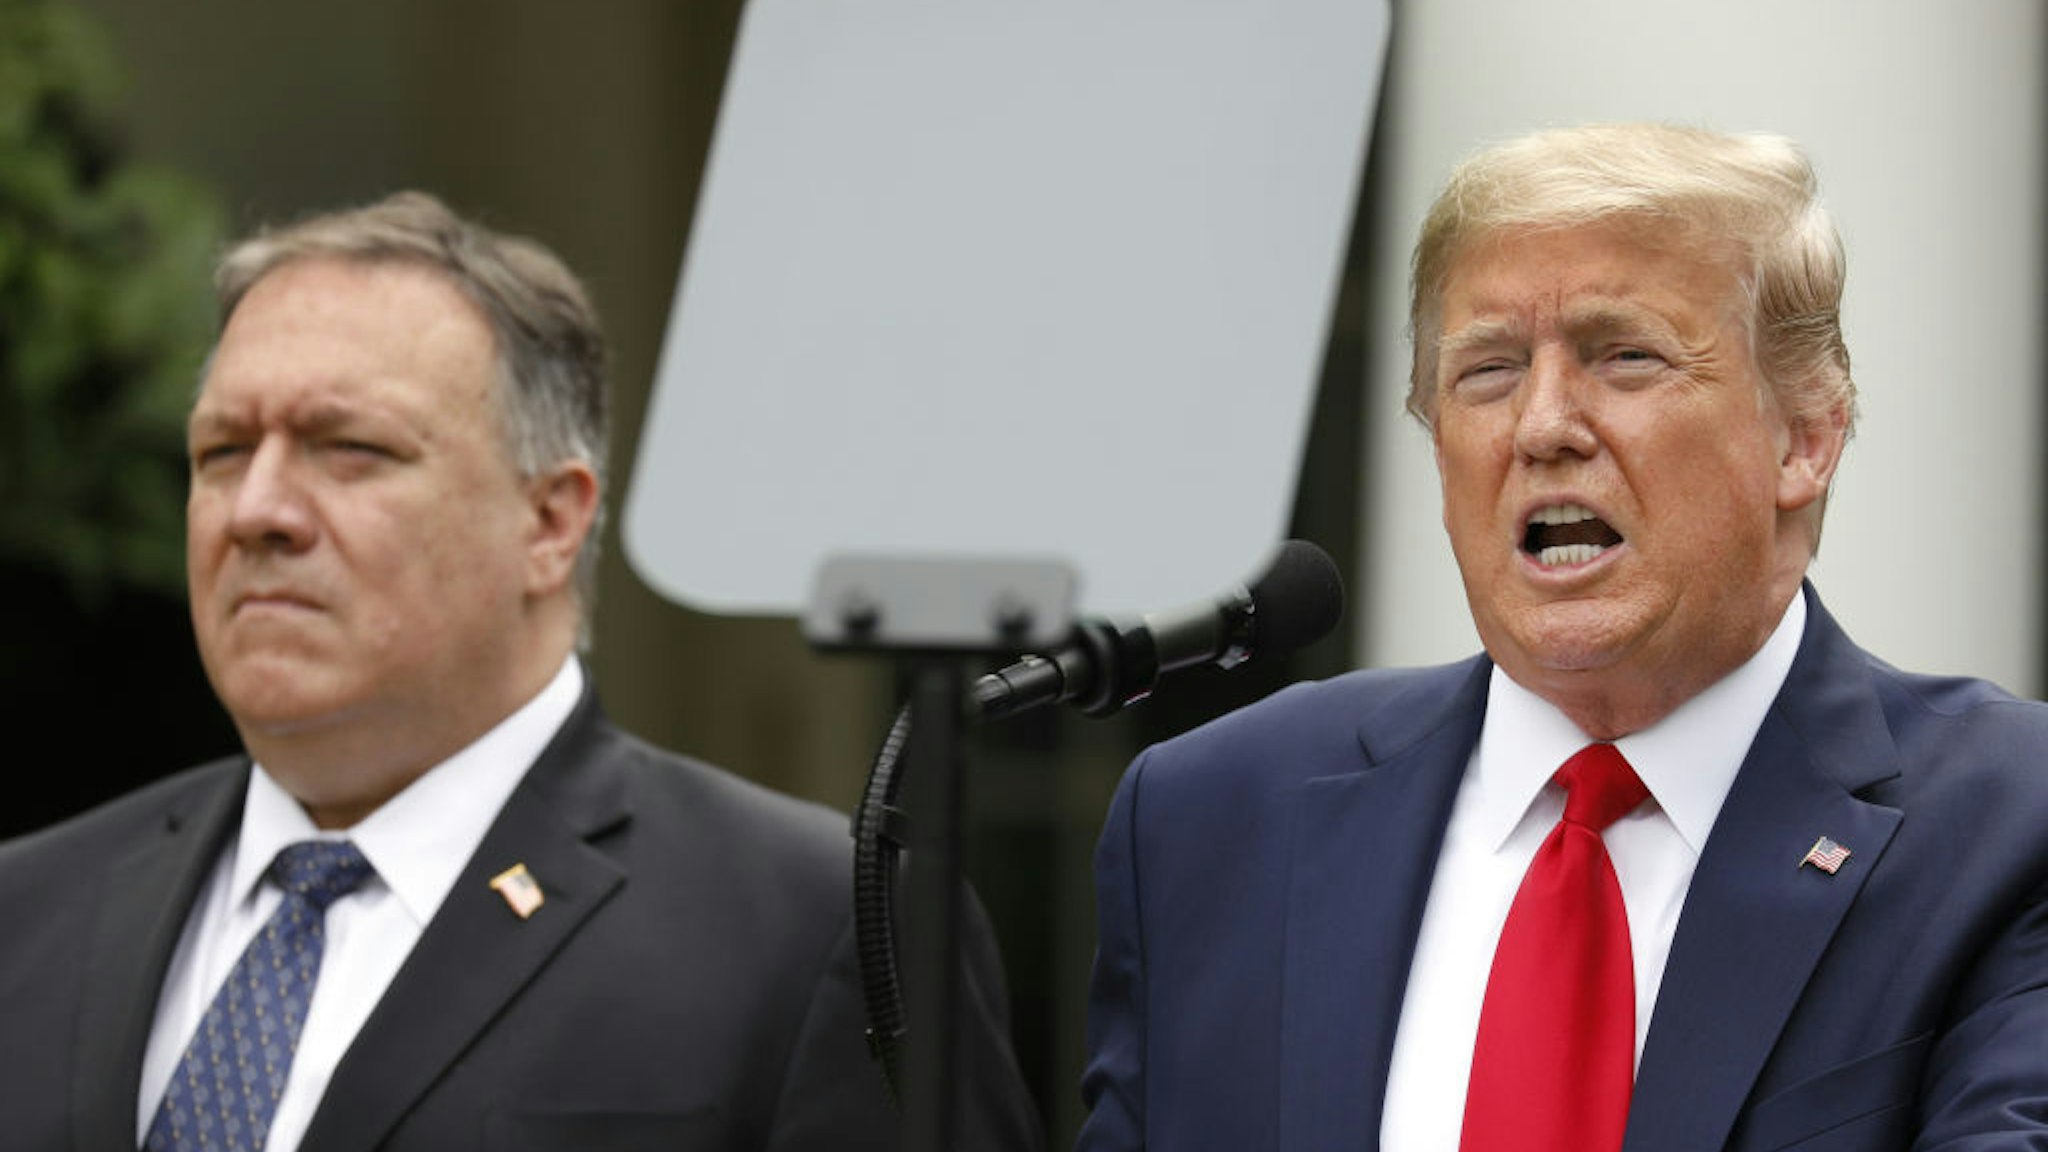 U.S. President Donald Trump speaks as Mike Pompeo, U.S. secretary of state, left, listens during a news conference in the Rose Garden of the White House in Washington, D.C., U.S., on Friday, May 29, 2020. Trump said the U.S. will terminate its relationship with the World Health Organization, which he has accused of being under Chinese control and failing to provide accurate information about the spread of coronavirus. Photographer: Yuri Gripas/Abaca/Bloomberg via Getty Images